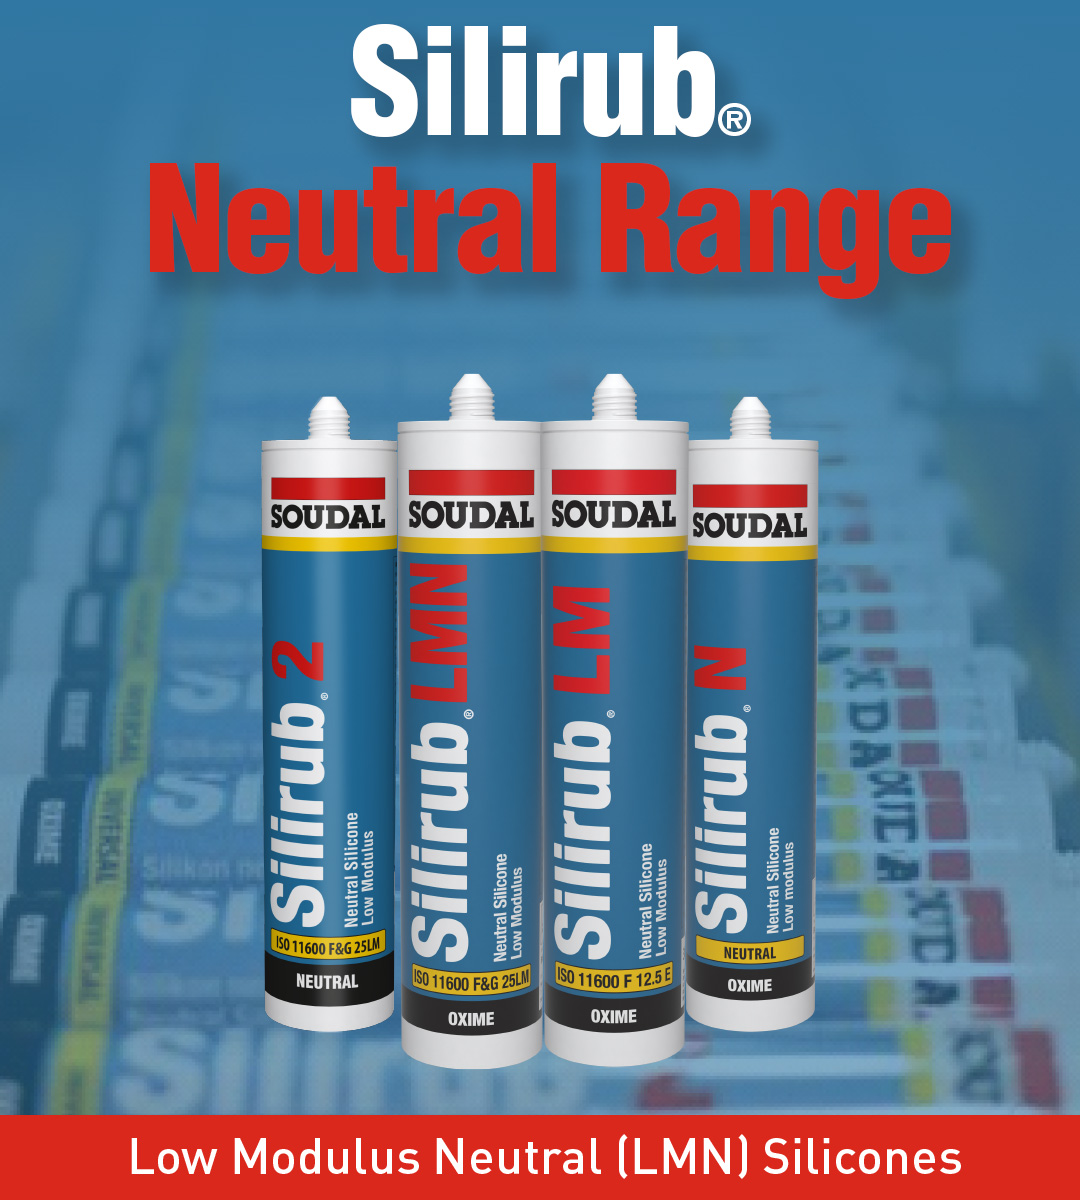 Silirub Neutral range is the perfect solution for your construction needs when it comes to high-quality sealants!

For more information on the Silirub Neutral range, visit our website: fal.cn/3yOJk

#Soudal #Sealant #BuildTheFuture